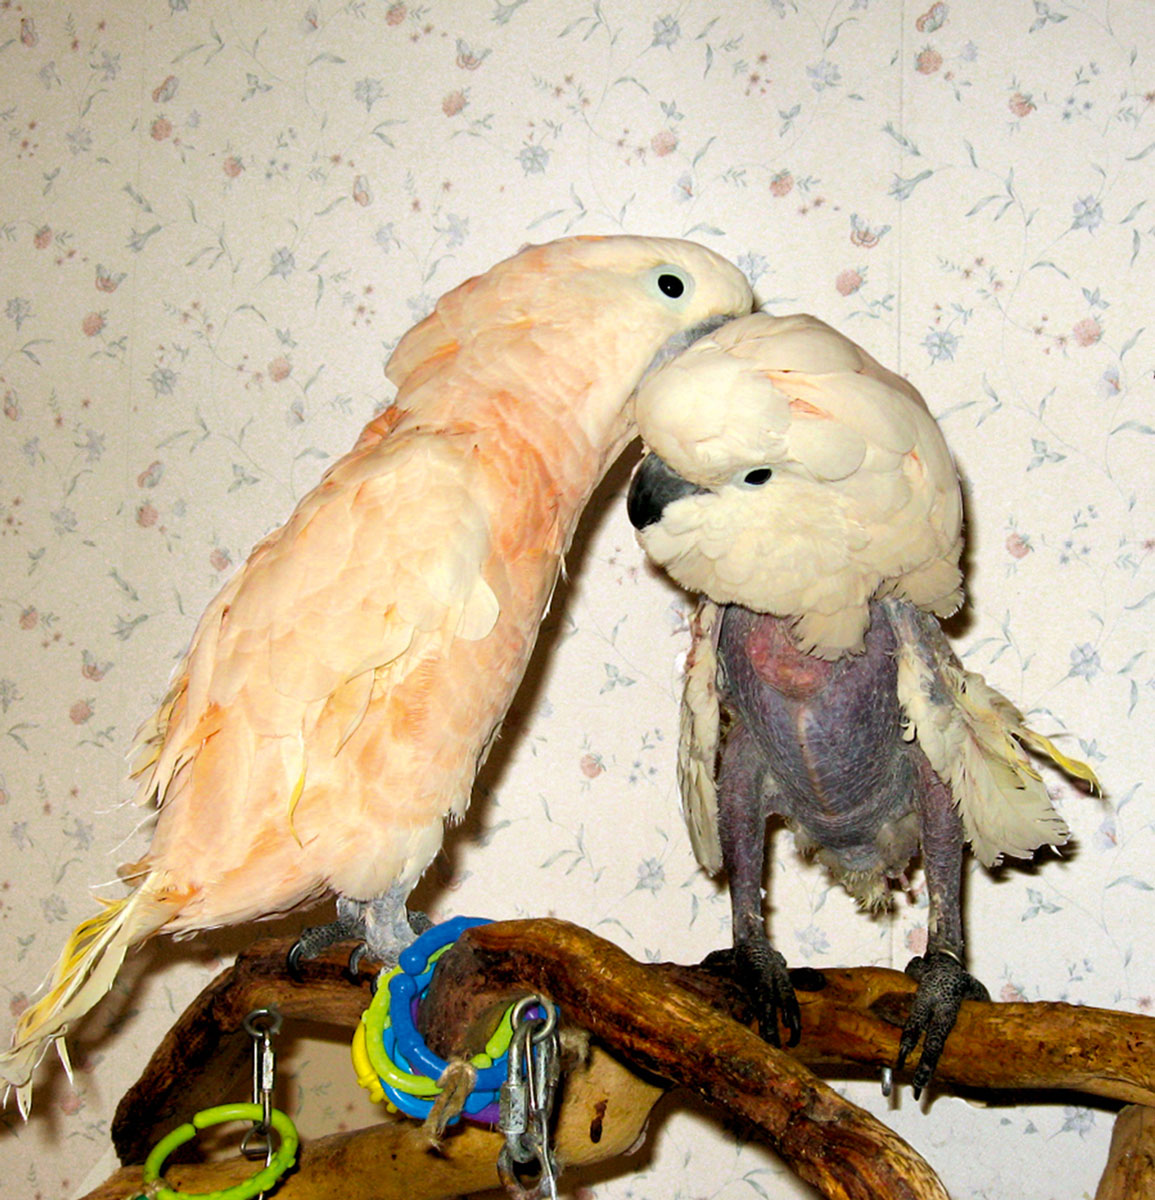 A photograph of two birds. Right is Chiquita, a thirty-two-year-old female Moluccan cockatoo who arrived at Mollywood Avian Sanctuary in her present plucked condition in two thousand and nine. Left is Eddie, a nineteen-year-old male Moluccan cockatoo who has been chewing off his wing and tail feathers for ten years. 